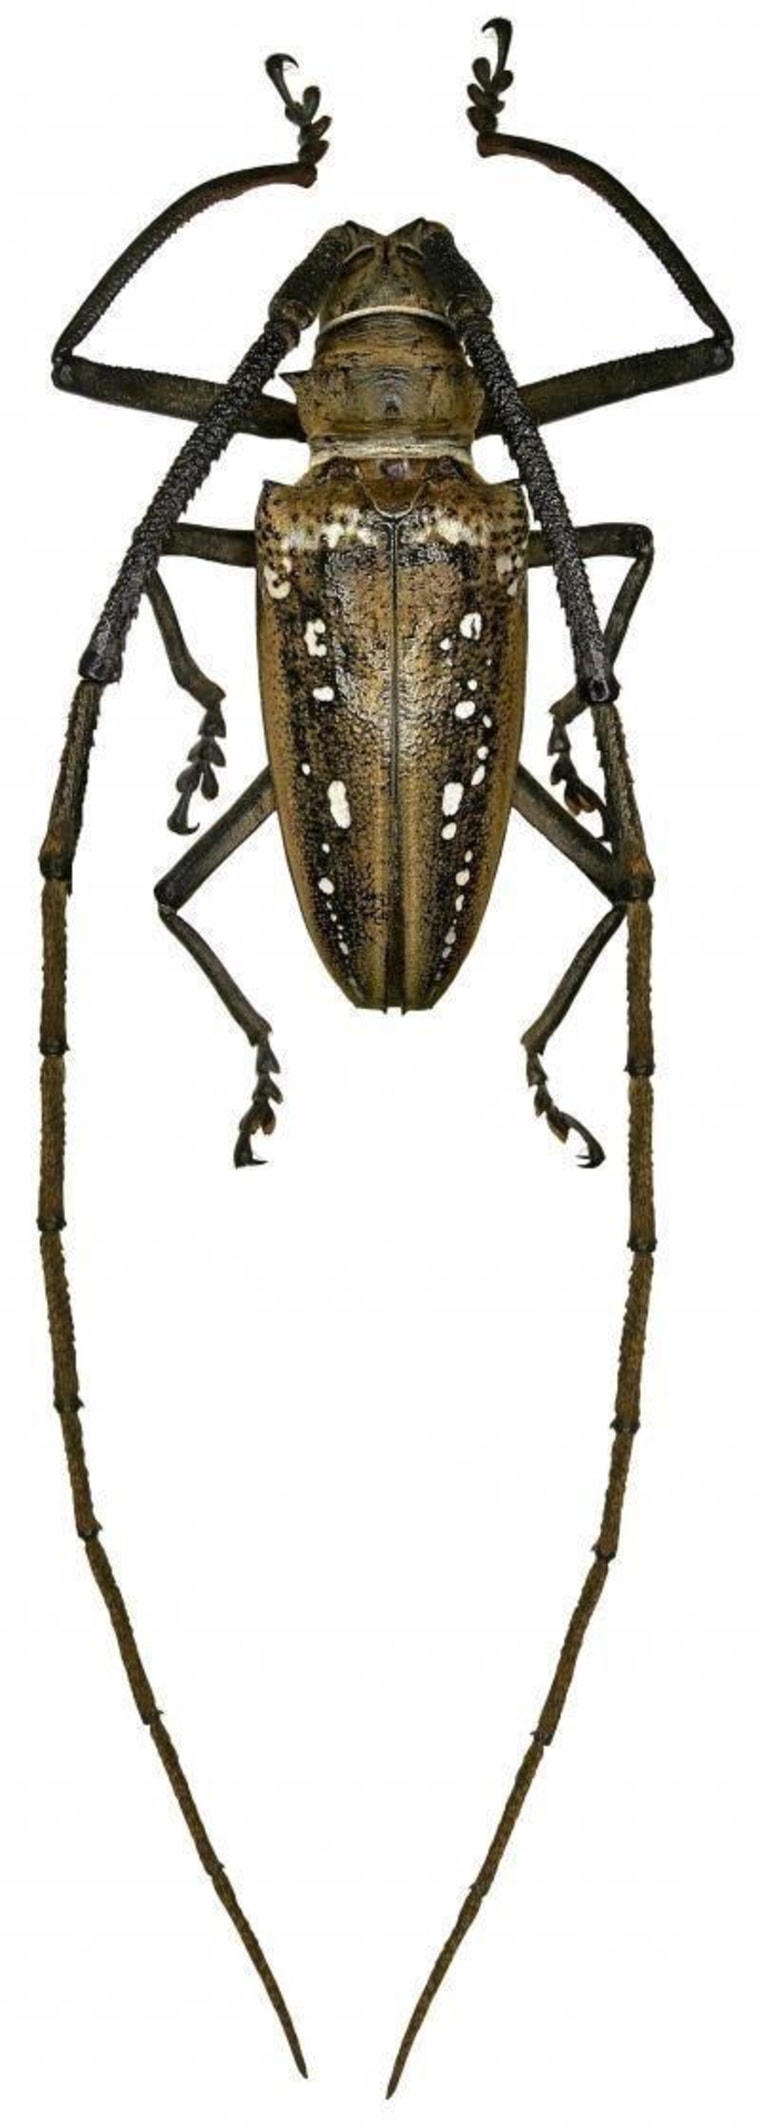 This is an image of Batocera wallacei Thomson, 1858 from Australasia, which belongs to the genus Batocera Dejean, 1835.